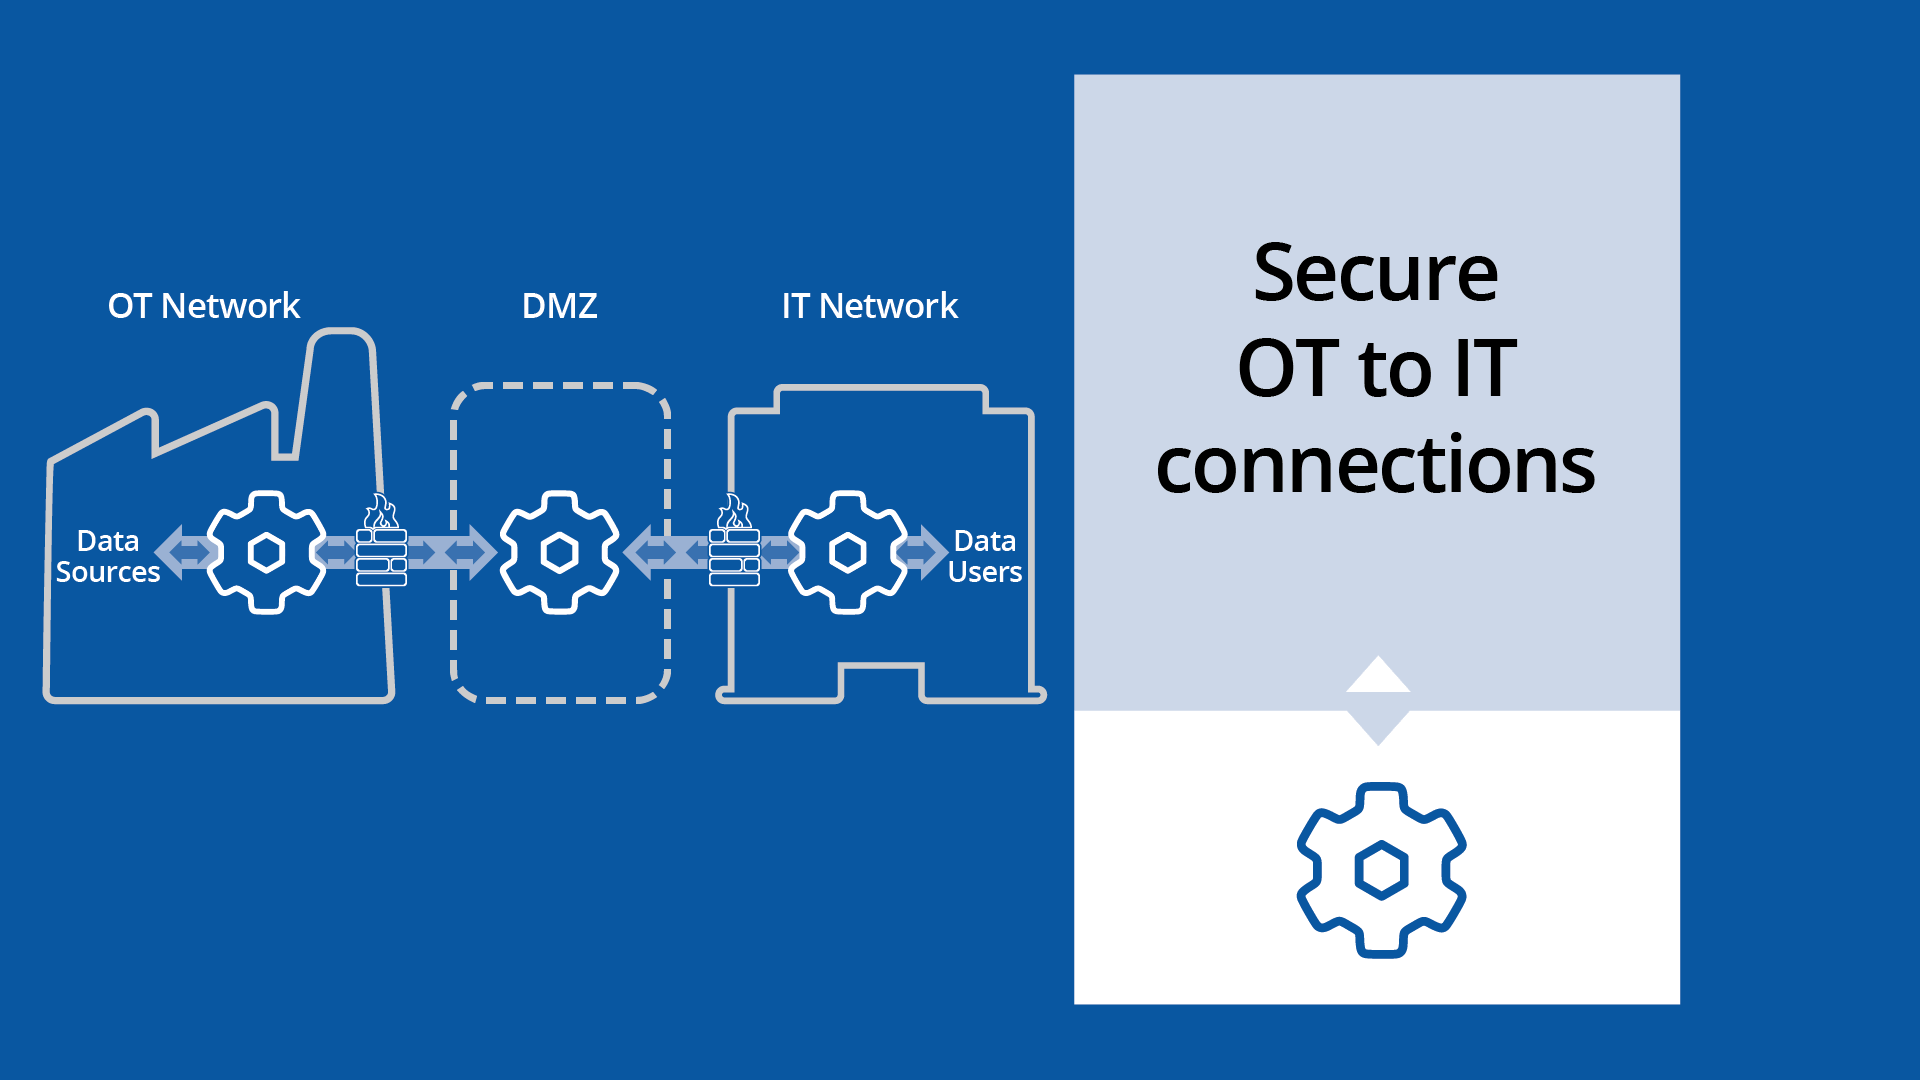 Secure OT to IT connections